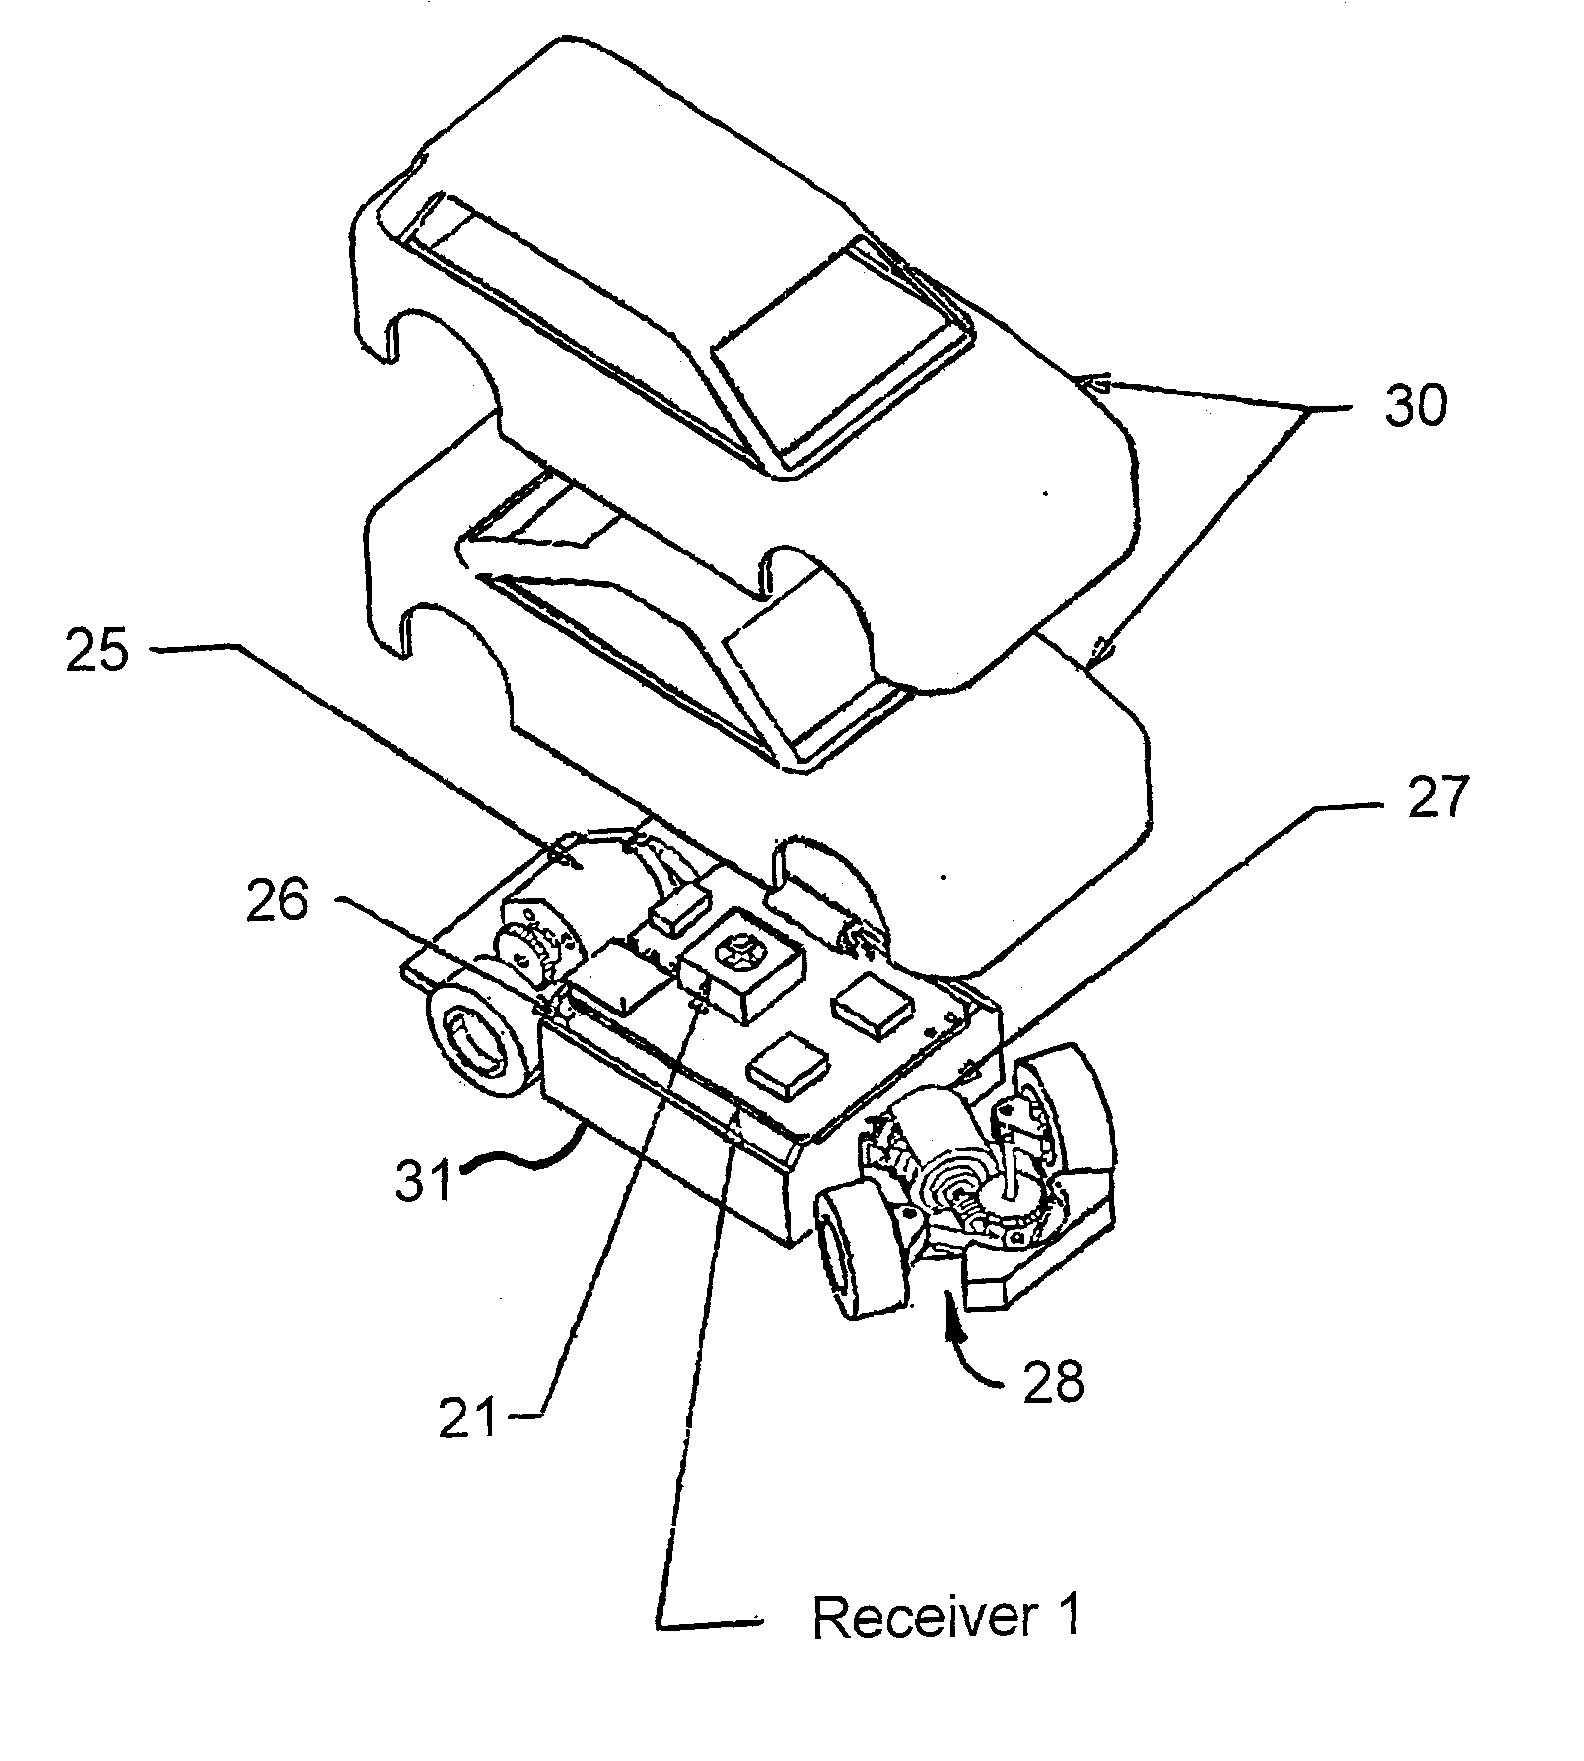 Systems and methods for radio control and operation of a miniature toy vehicle including interchangeable bodies